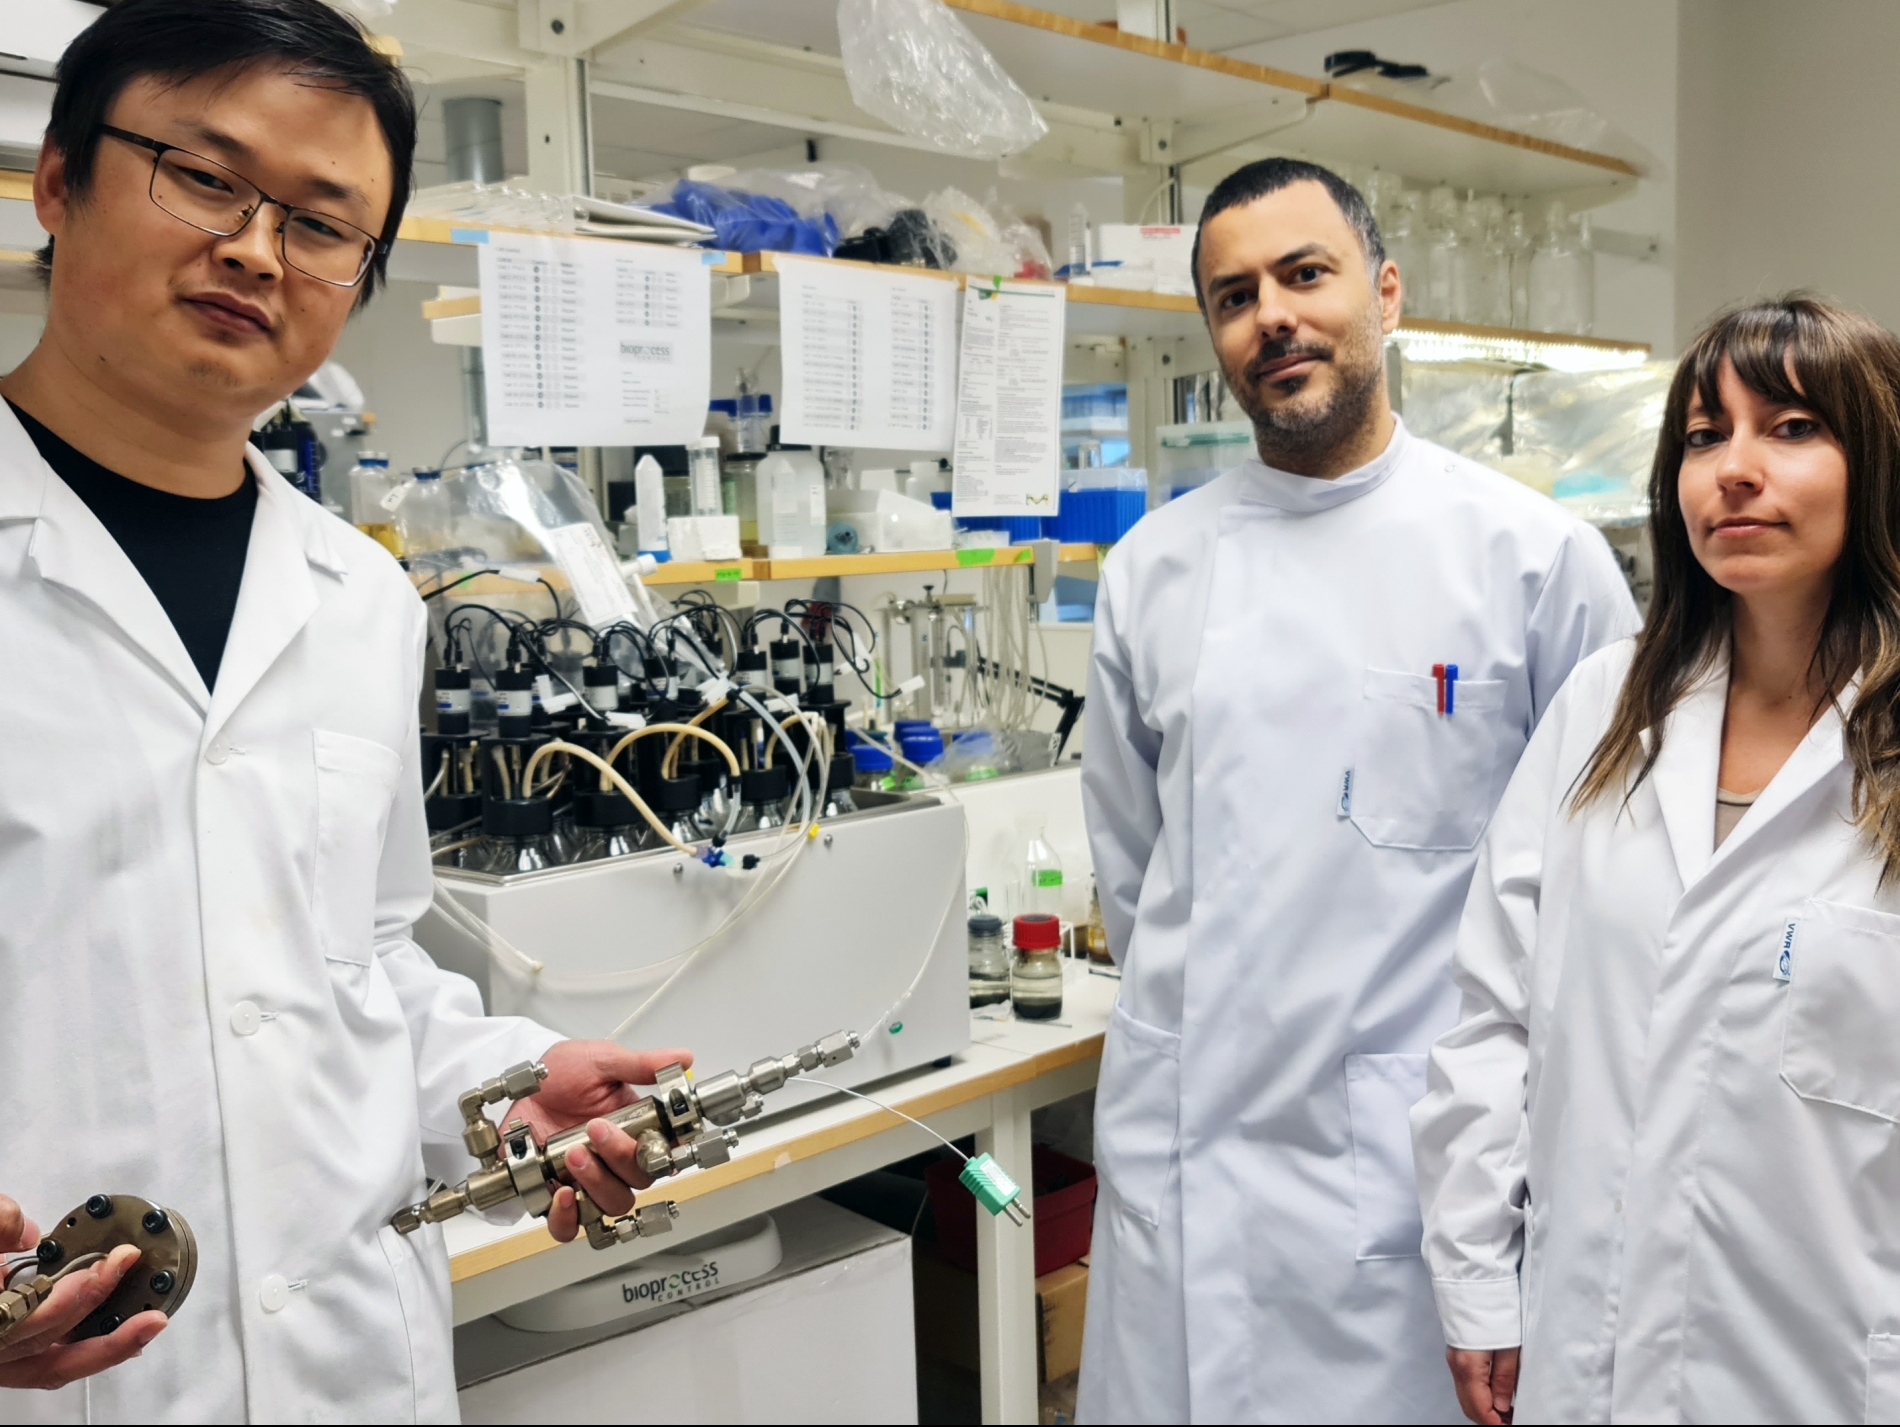 Liang Yu, Leonidas Matsakas and Io Antonopoulou in a research laboratory at Luleå University of Technology, Sweden. Photo by courtesy of Liang Yu.